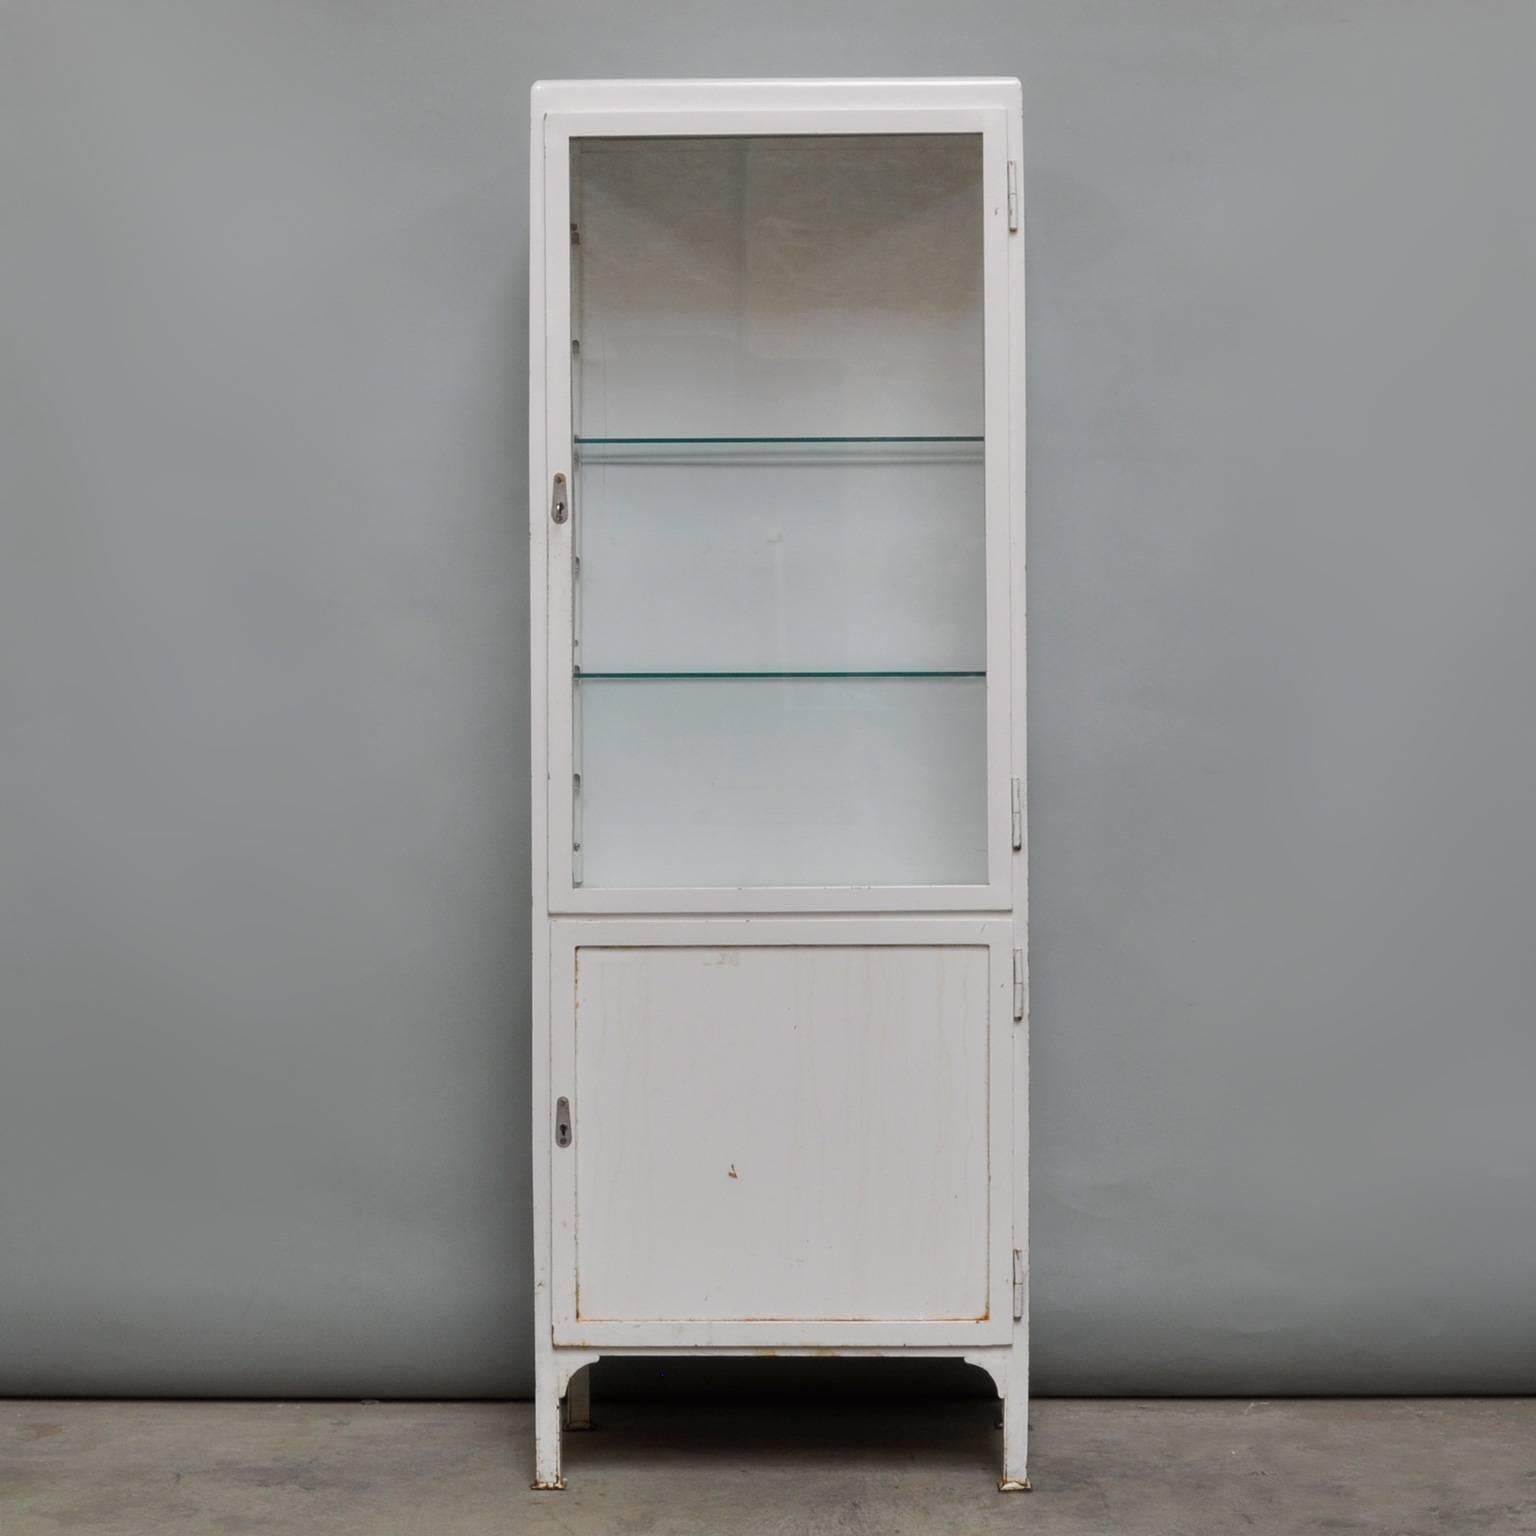 Produced in the Czech Republic in the 1960s. With two (adjustable) glass shelves. Behind the bottom door a steel shelf.